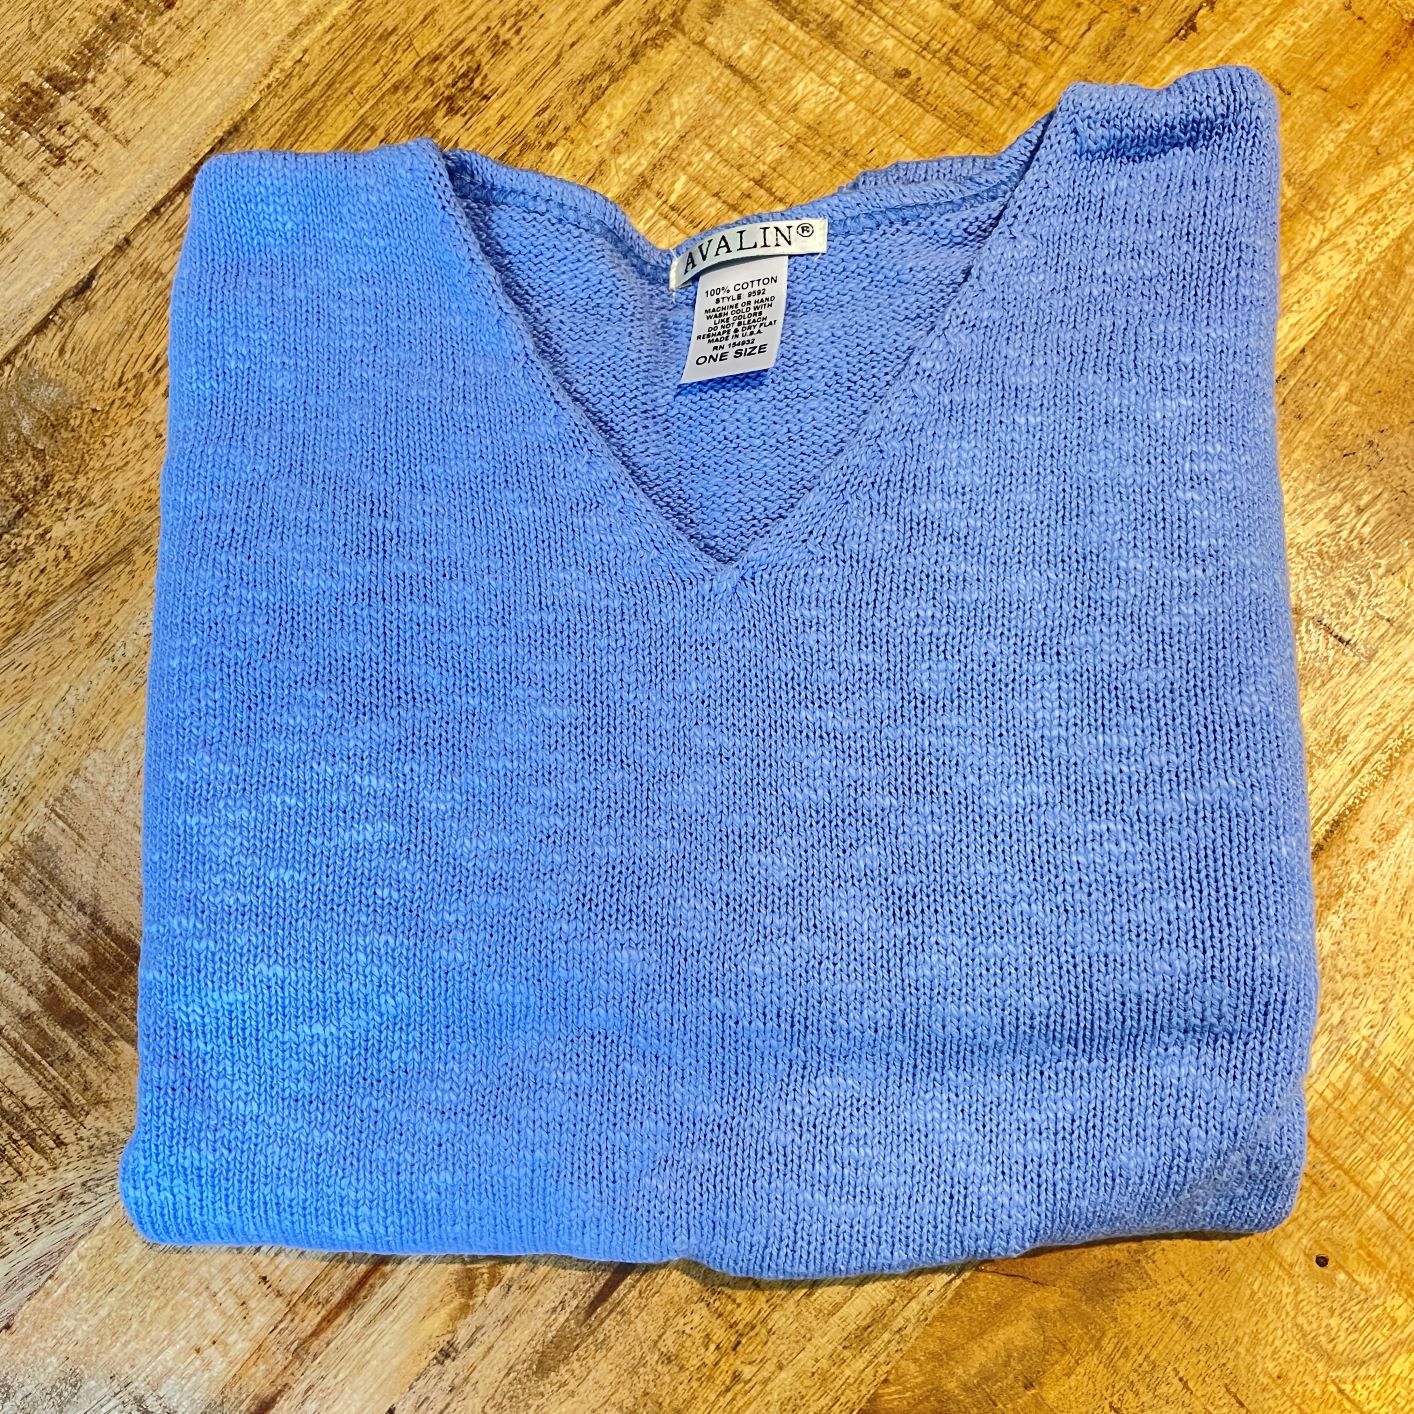 100% cotton slub sweater by Avalin. In color periwinkle blue with long sleeves, v-neck,  straight hem with ribbed edges. Semi-crop style falls just below the belt. Made in USA.